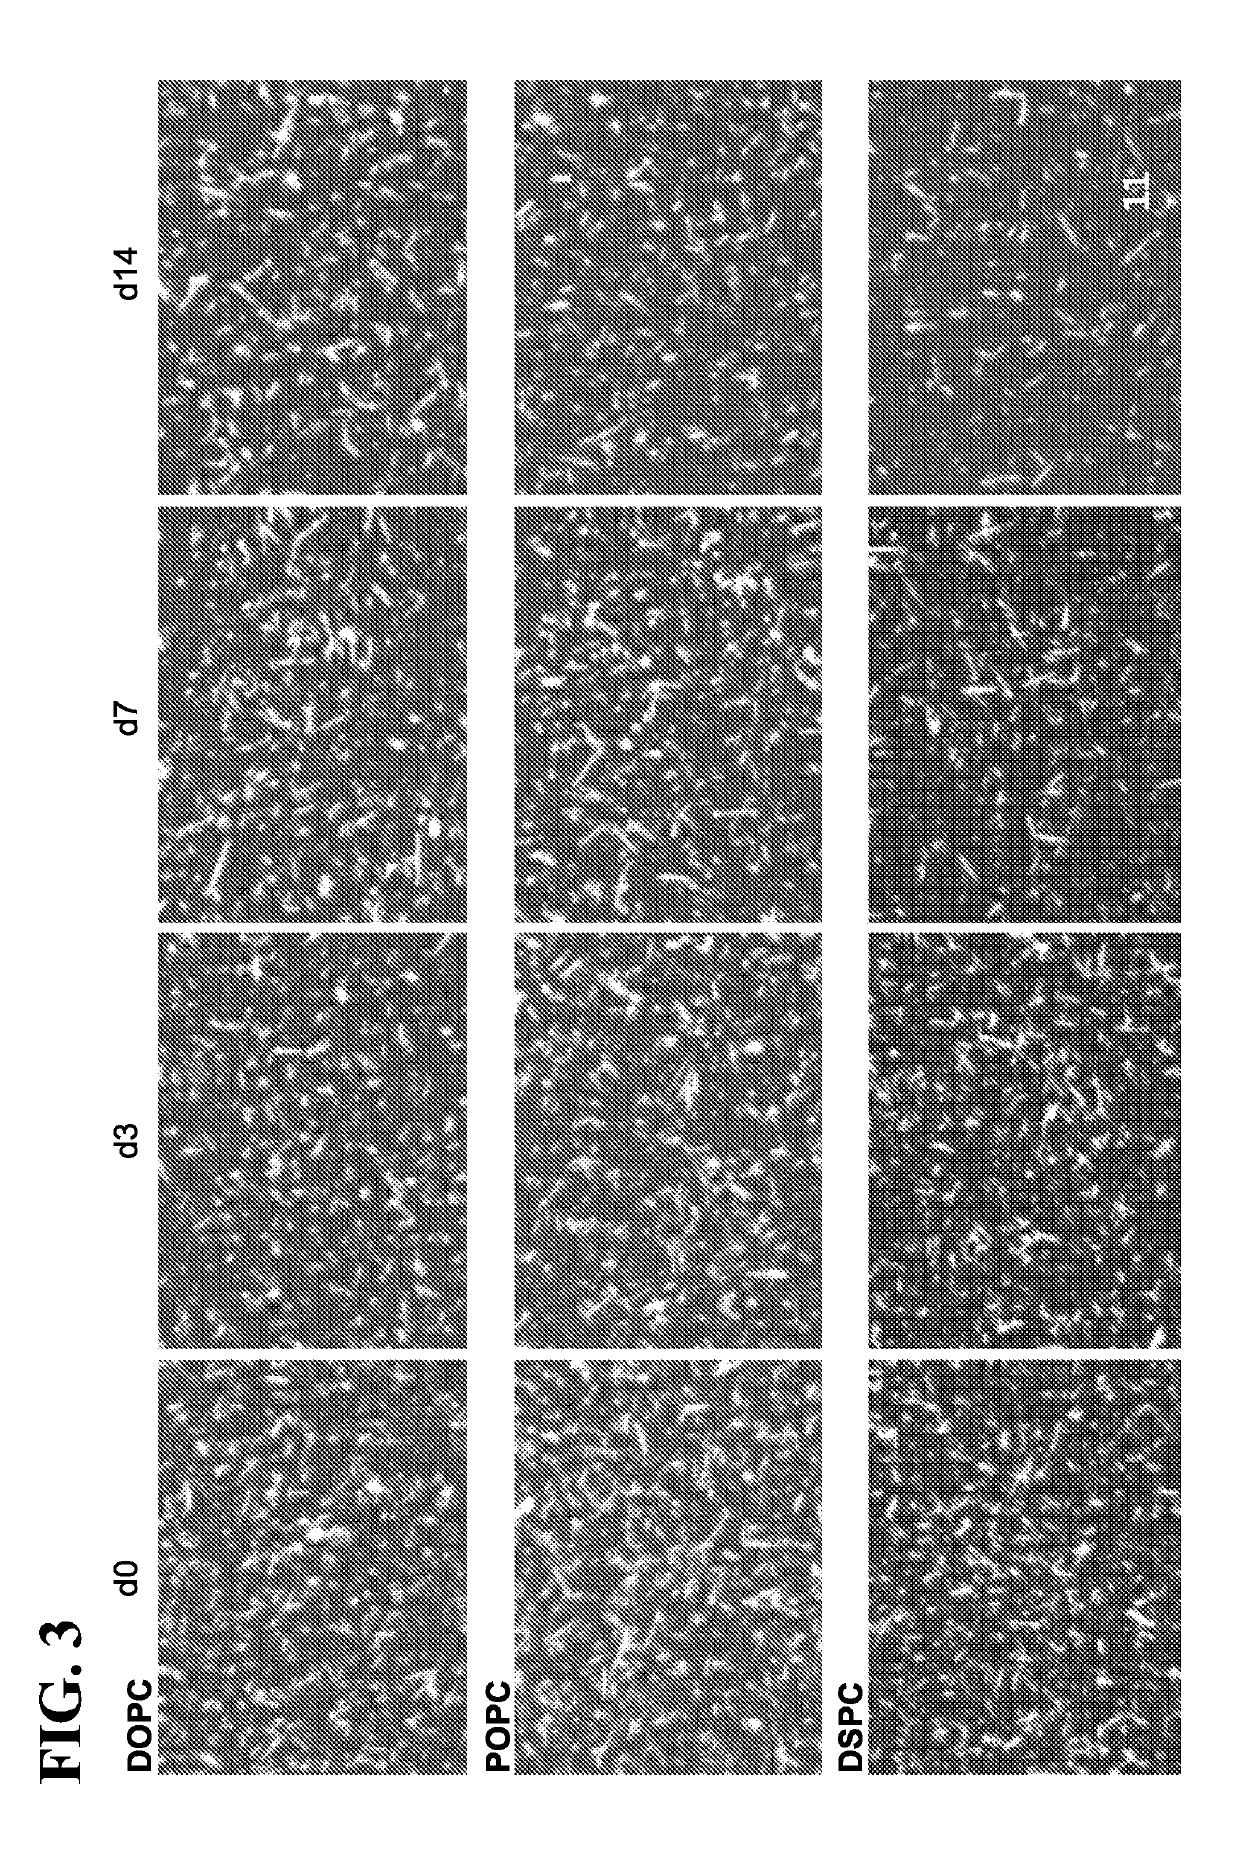 Antigen-presenting cell-mimetic scaffolds and methods for making and using the same